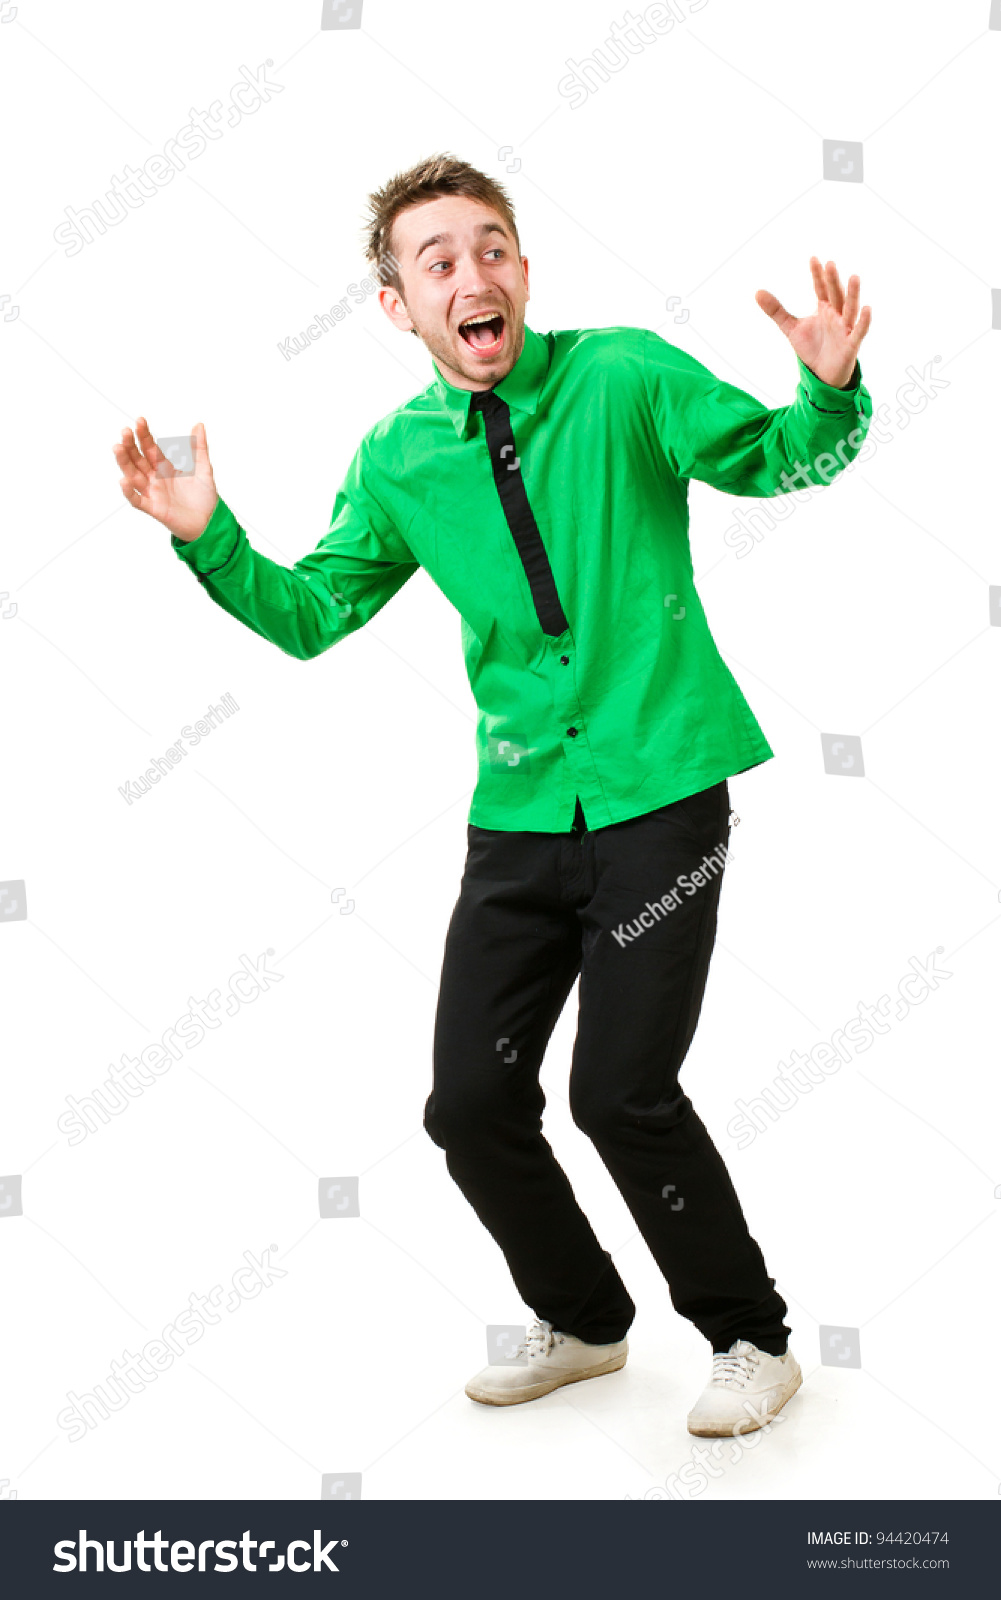 Man Screaming On A White Background Stock Photo 94420474 : Shutterstock